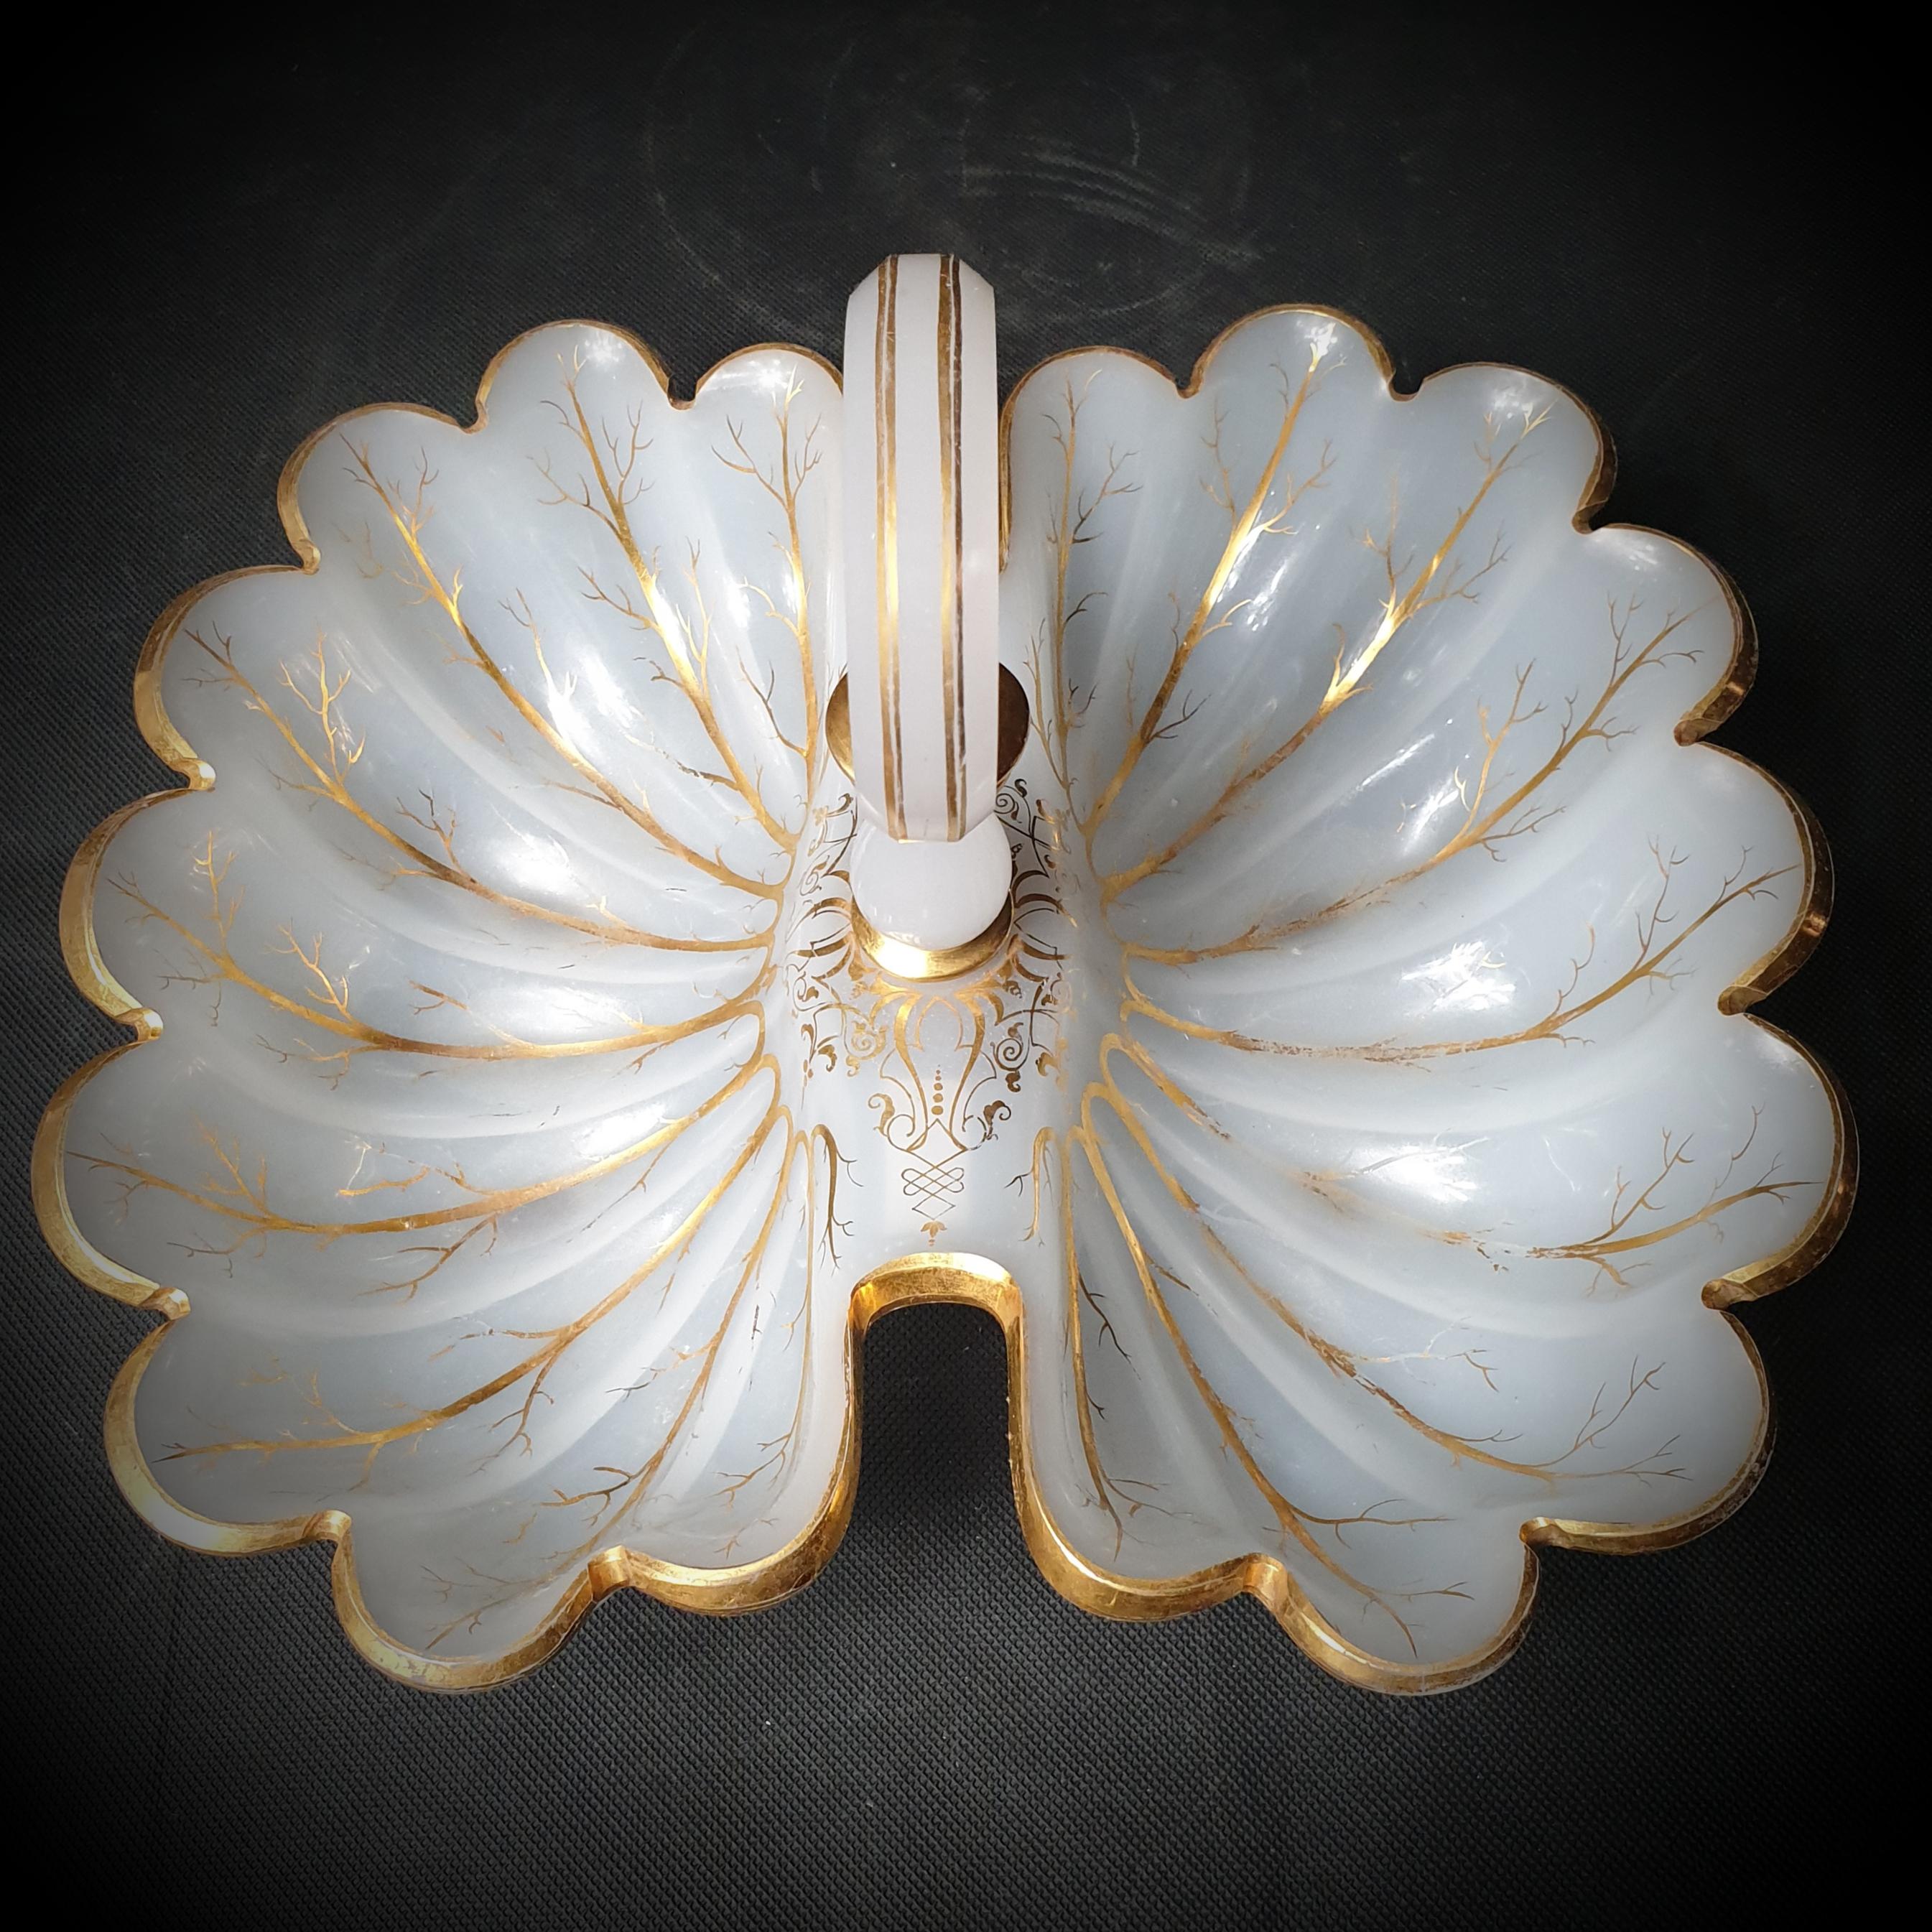 White Gilded Opaline Glass Serving Dish, Kidney Shaped, Late 19th Century For Sale 1